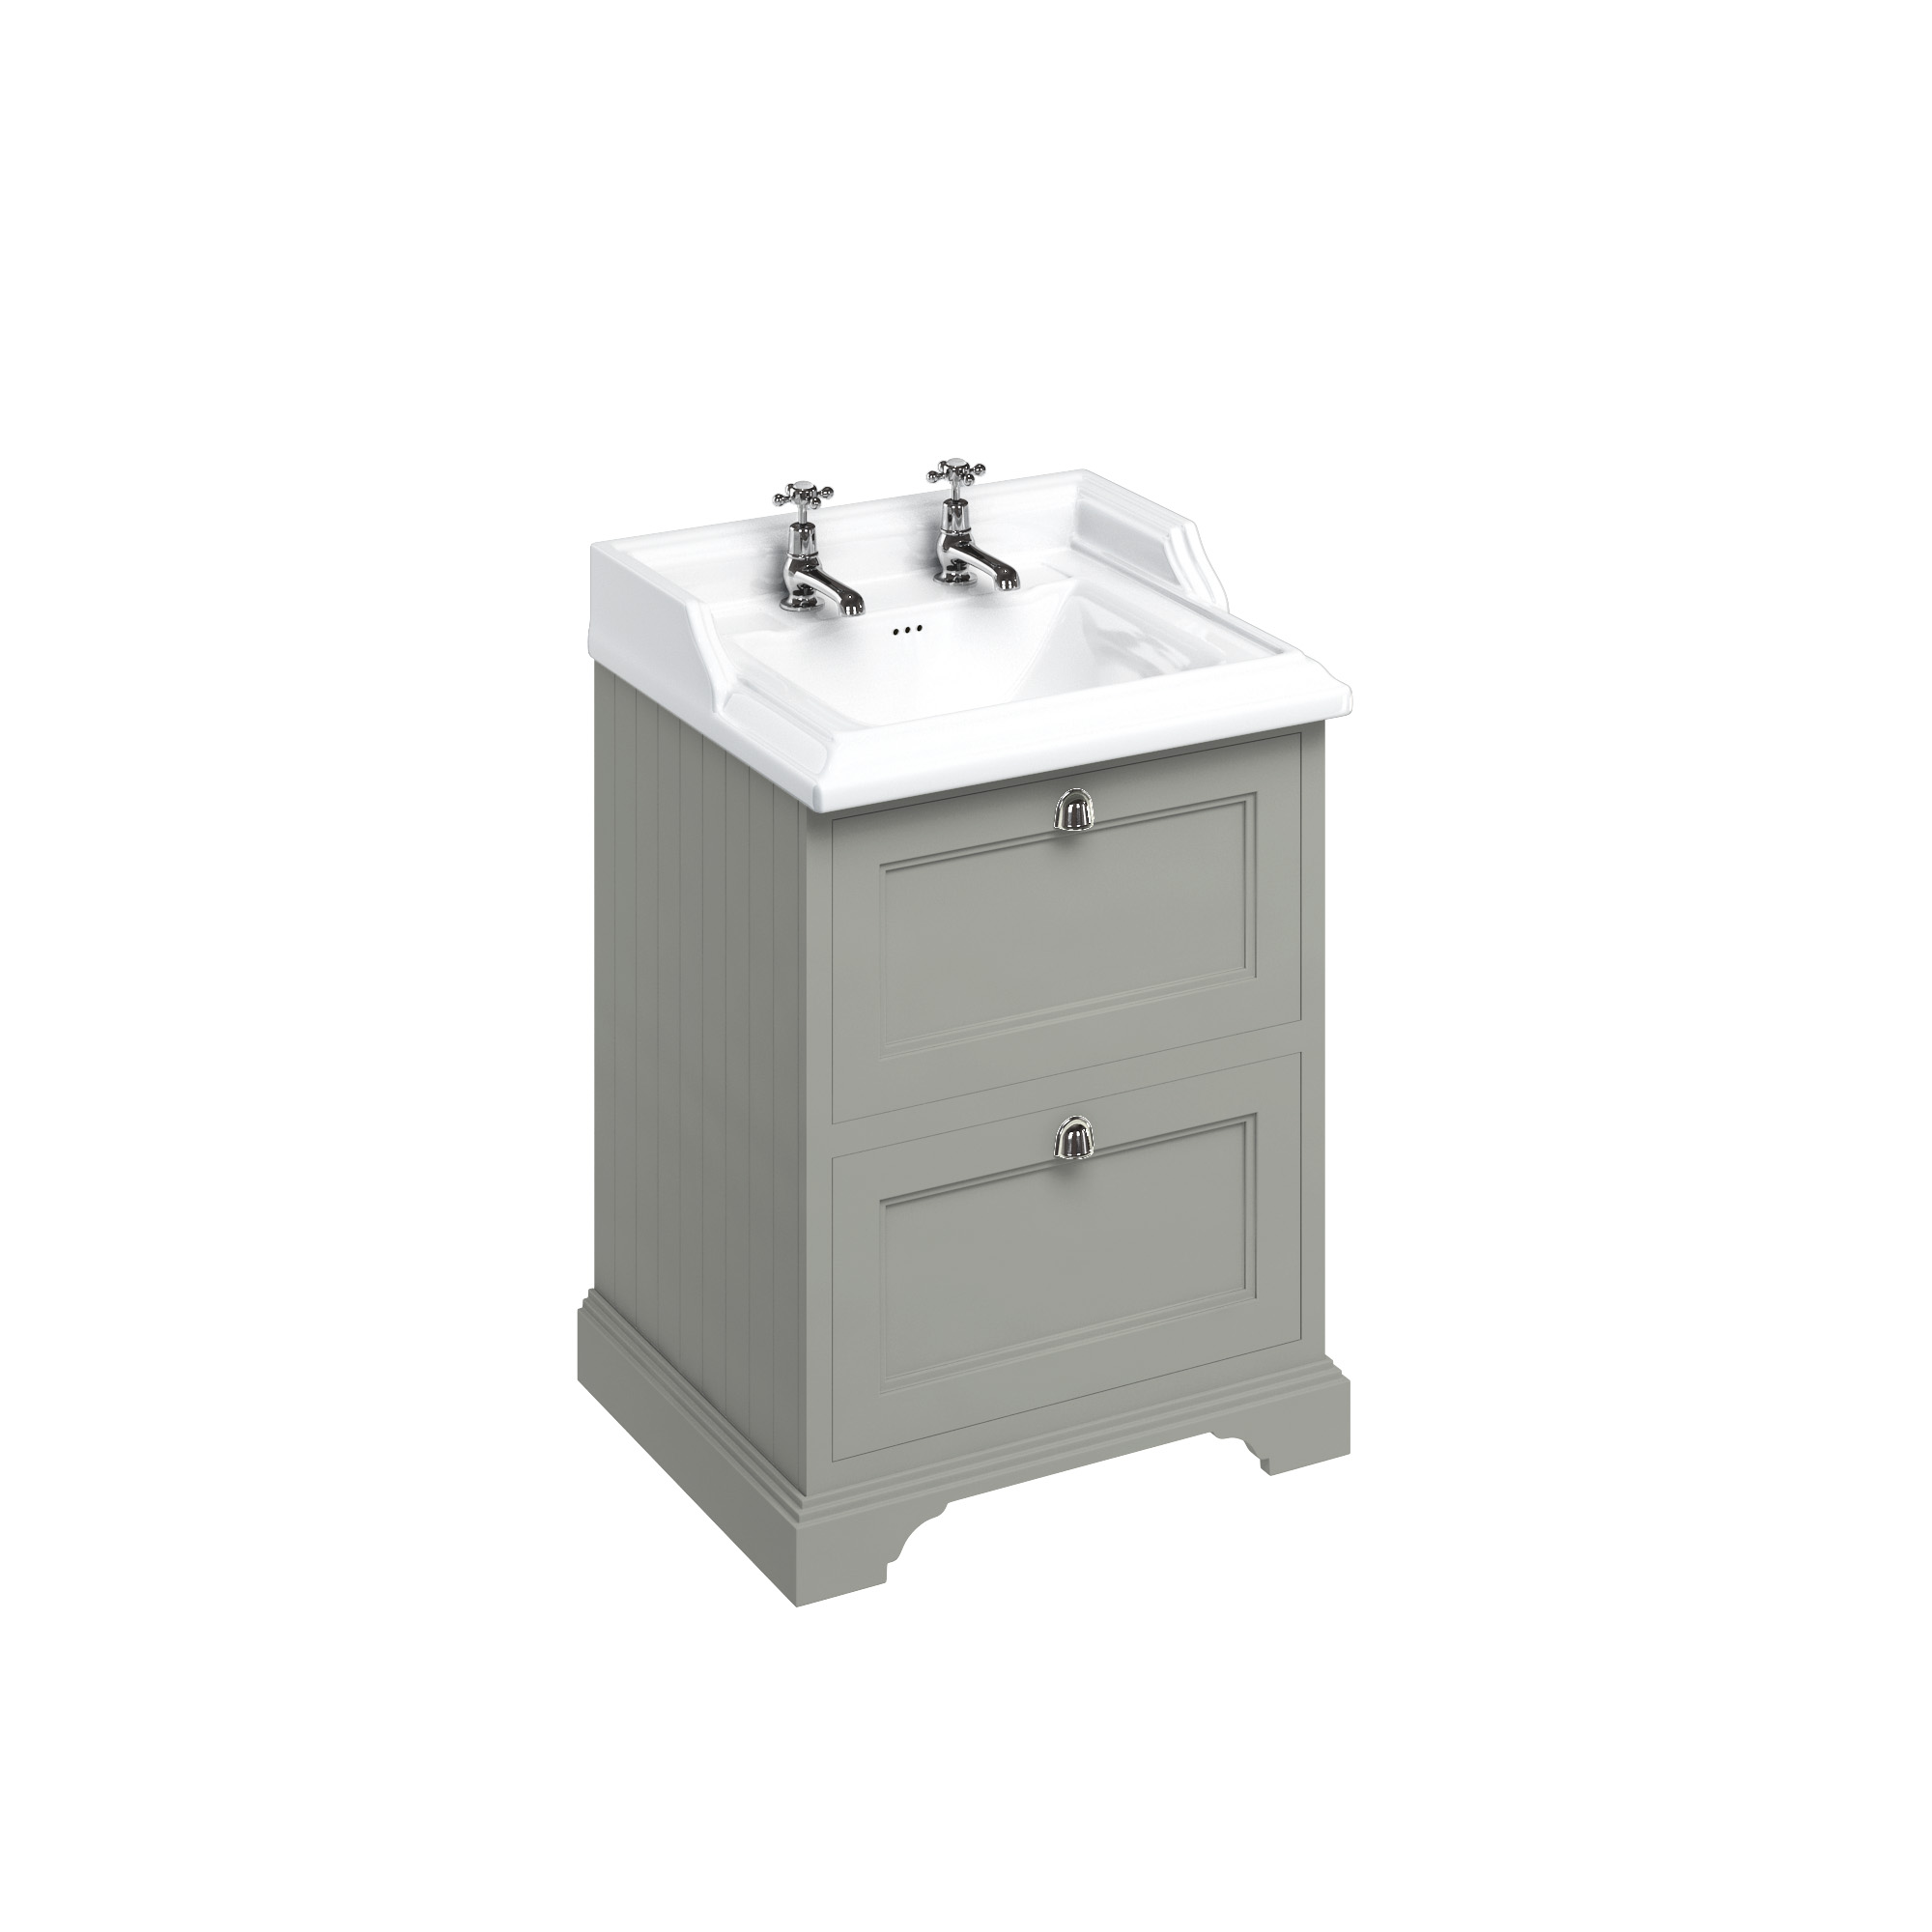 Freestanding 65 Vanity Unit with 2 drawers - Dark Olive and Classic basin 2 tap holes